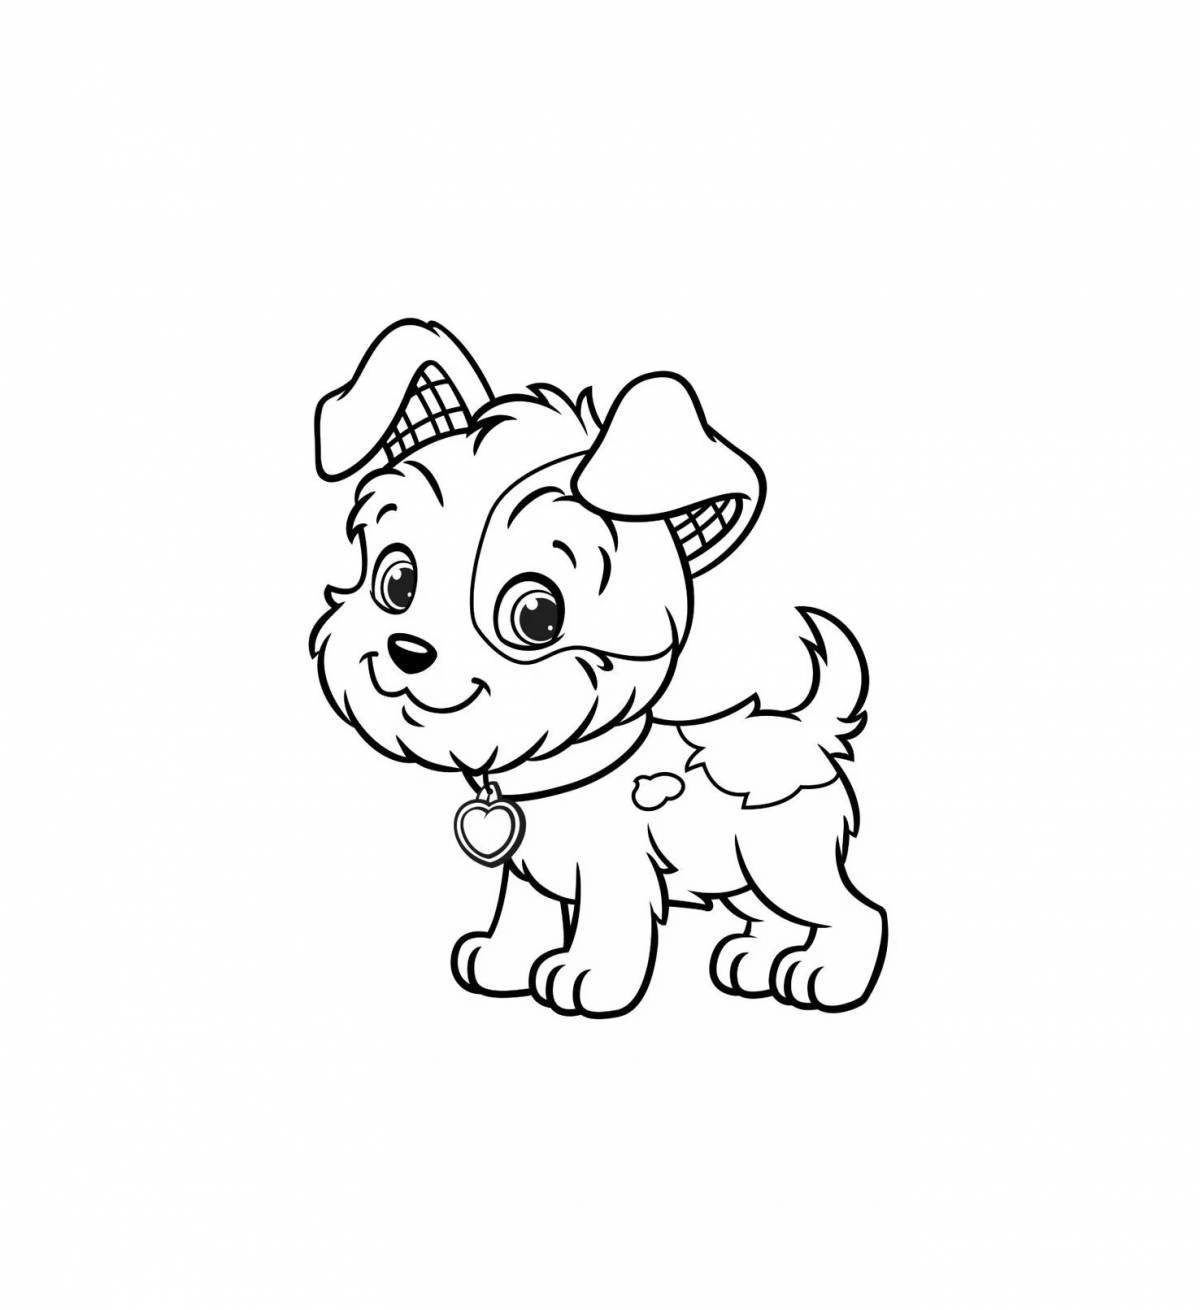 Live dog coloring for children 5-6 years old